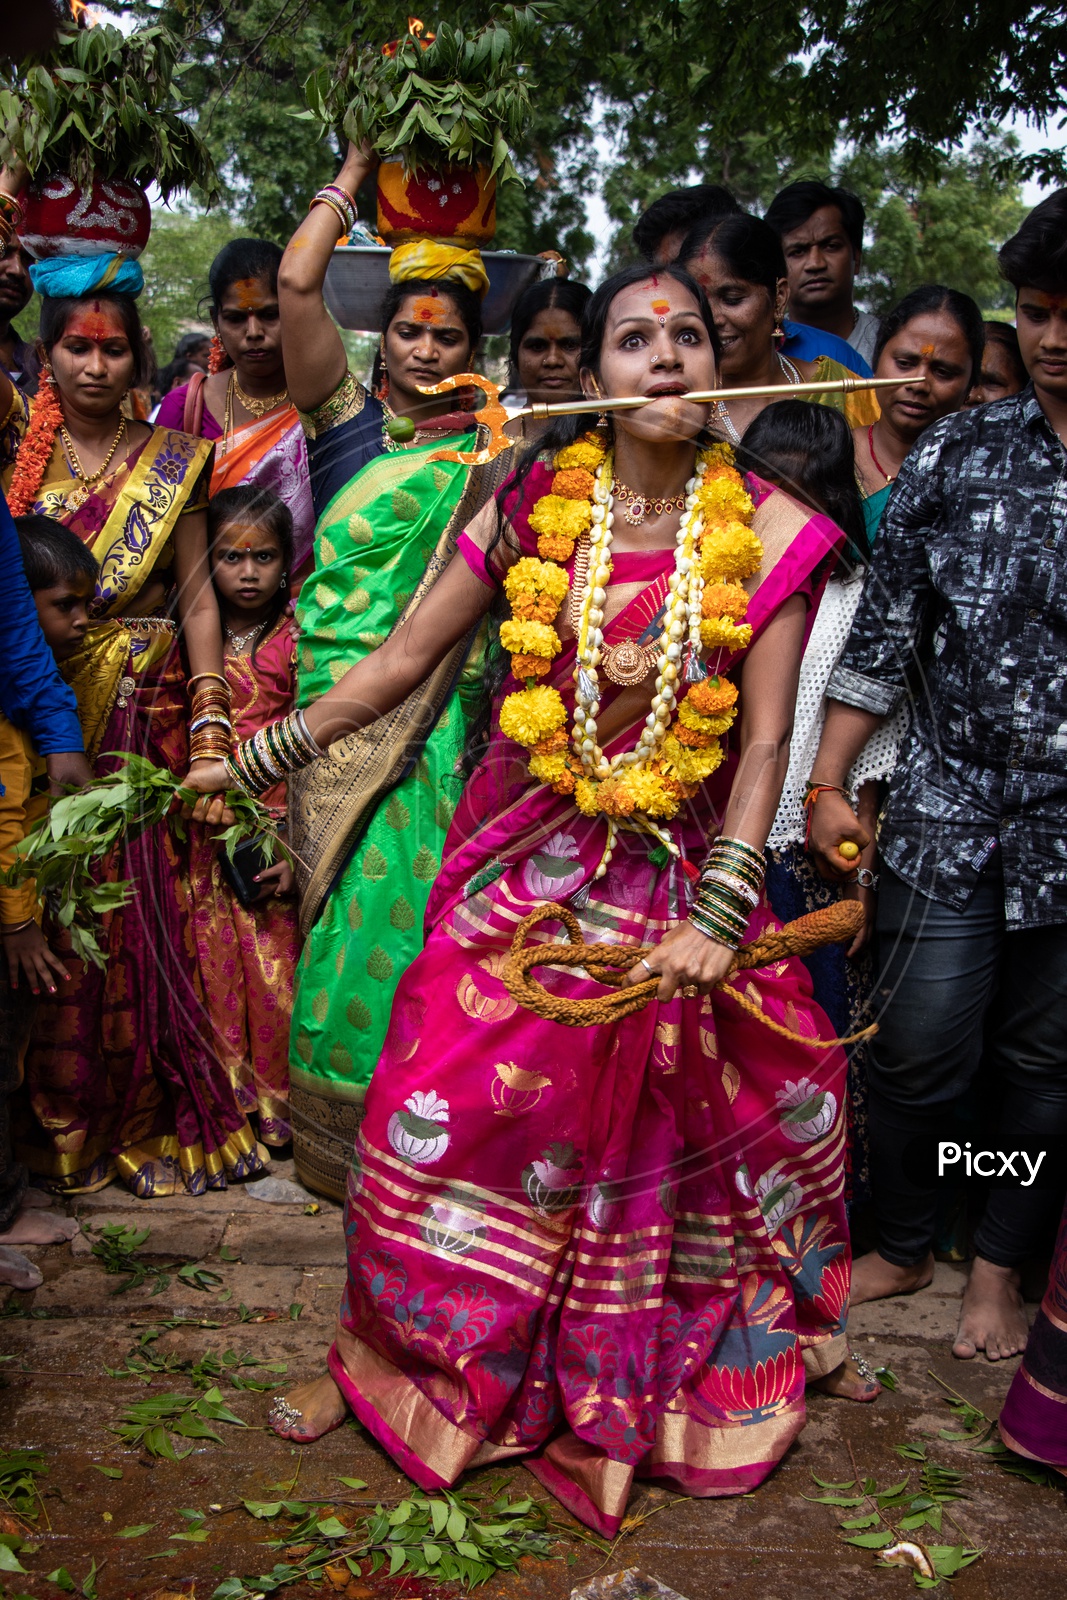 A Tranced Woman Dancing As a Offering To Mother Goddess  in  Bonalu  Festival Held At Golconda Fort